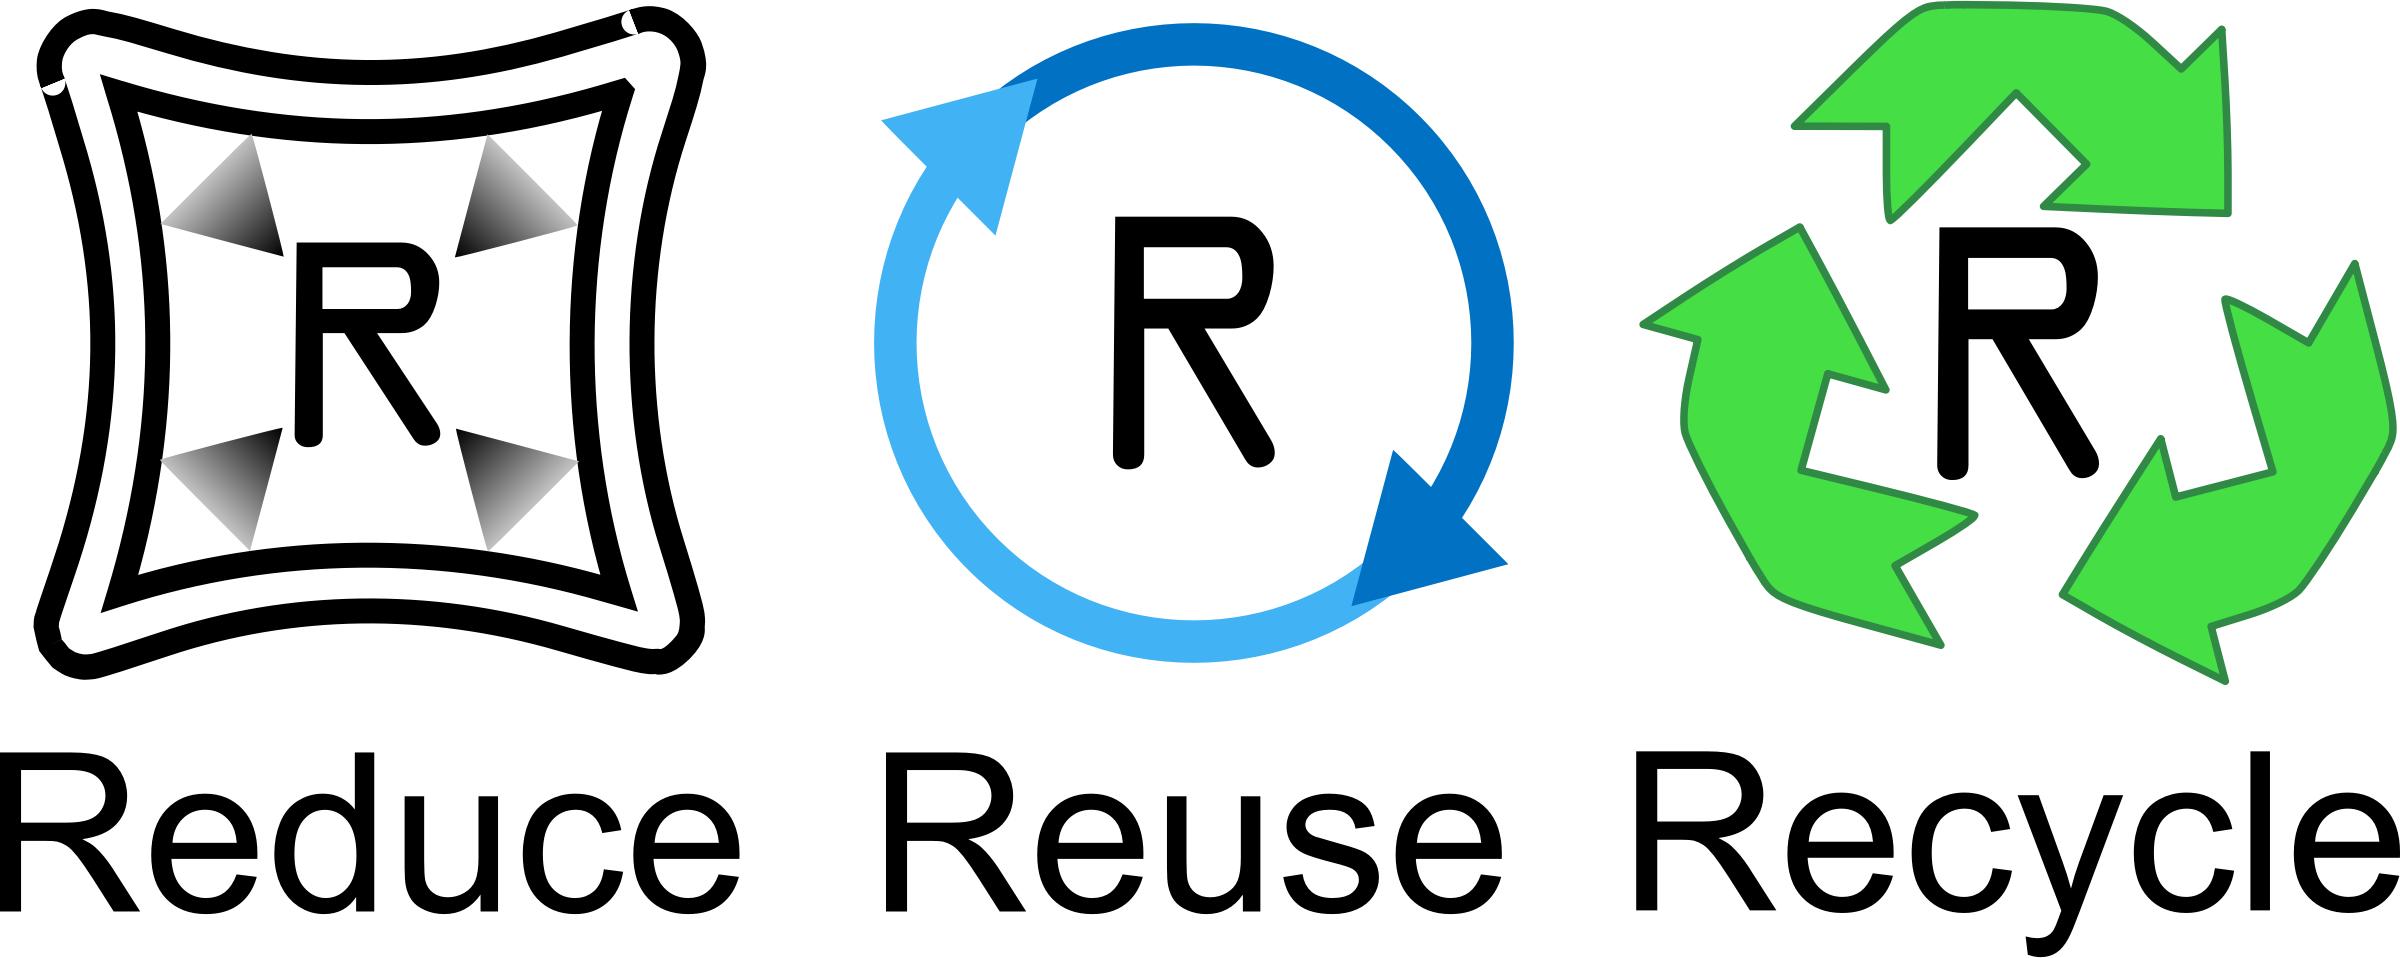 Reduce Reuse Recycle Circle - Recycle - Sticker | TeePublic